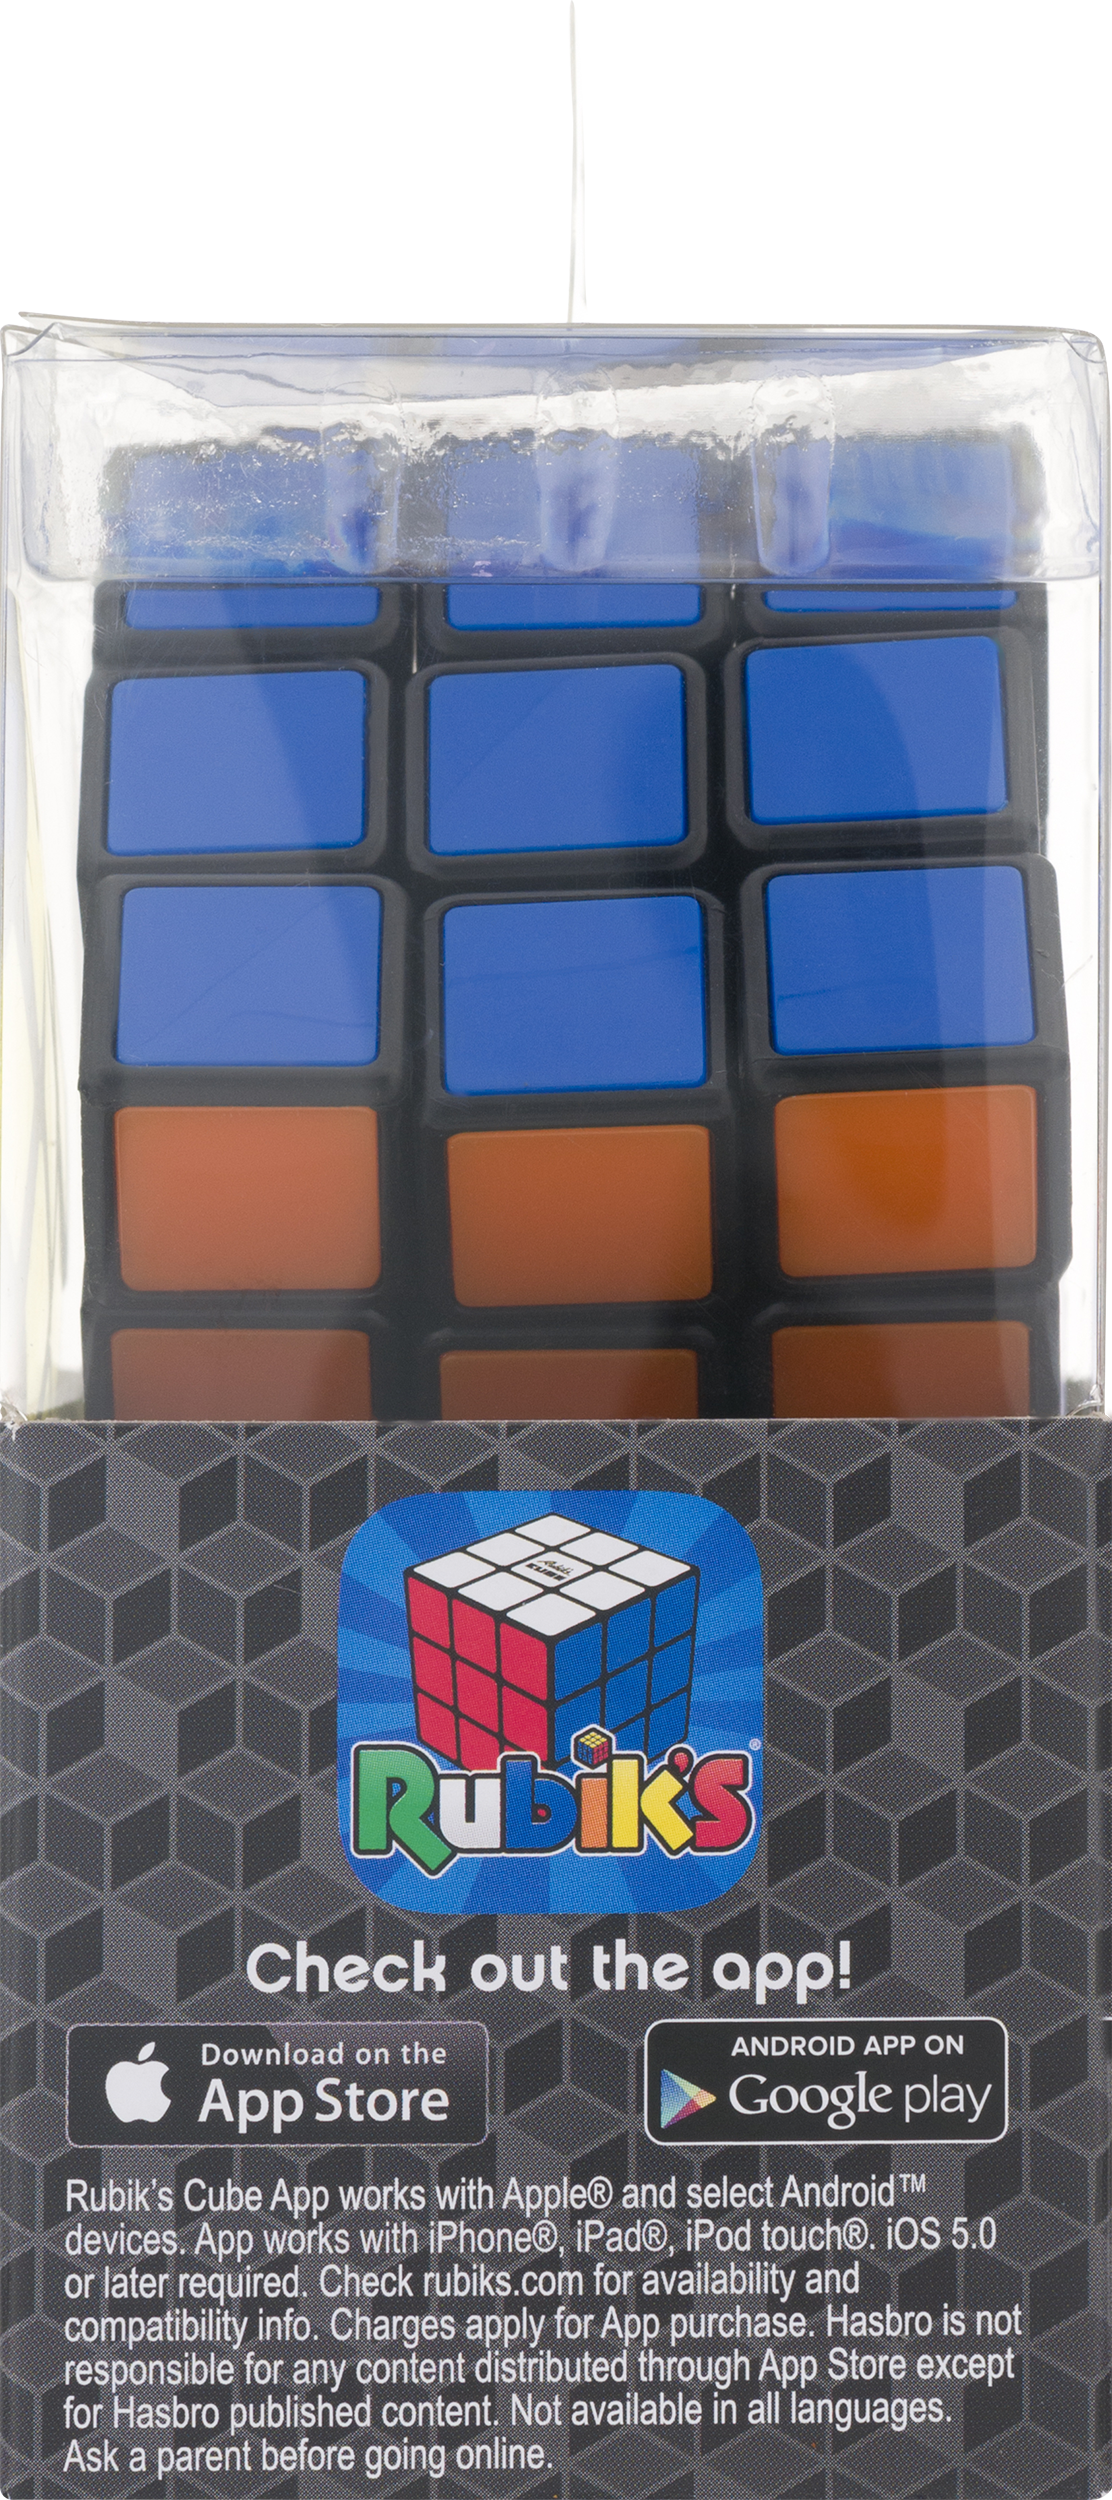 Rubik's Cube 3 x 3 Puzzle Game for Kids Ages 8 and Up - image 5 of 8